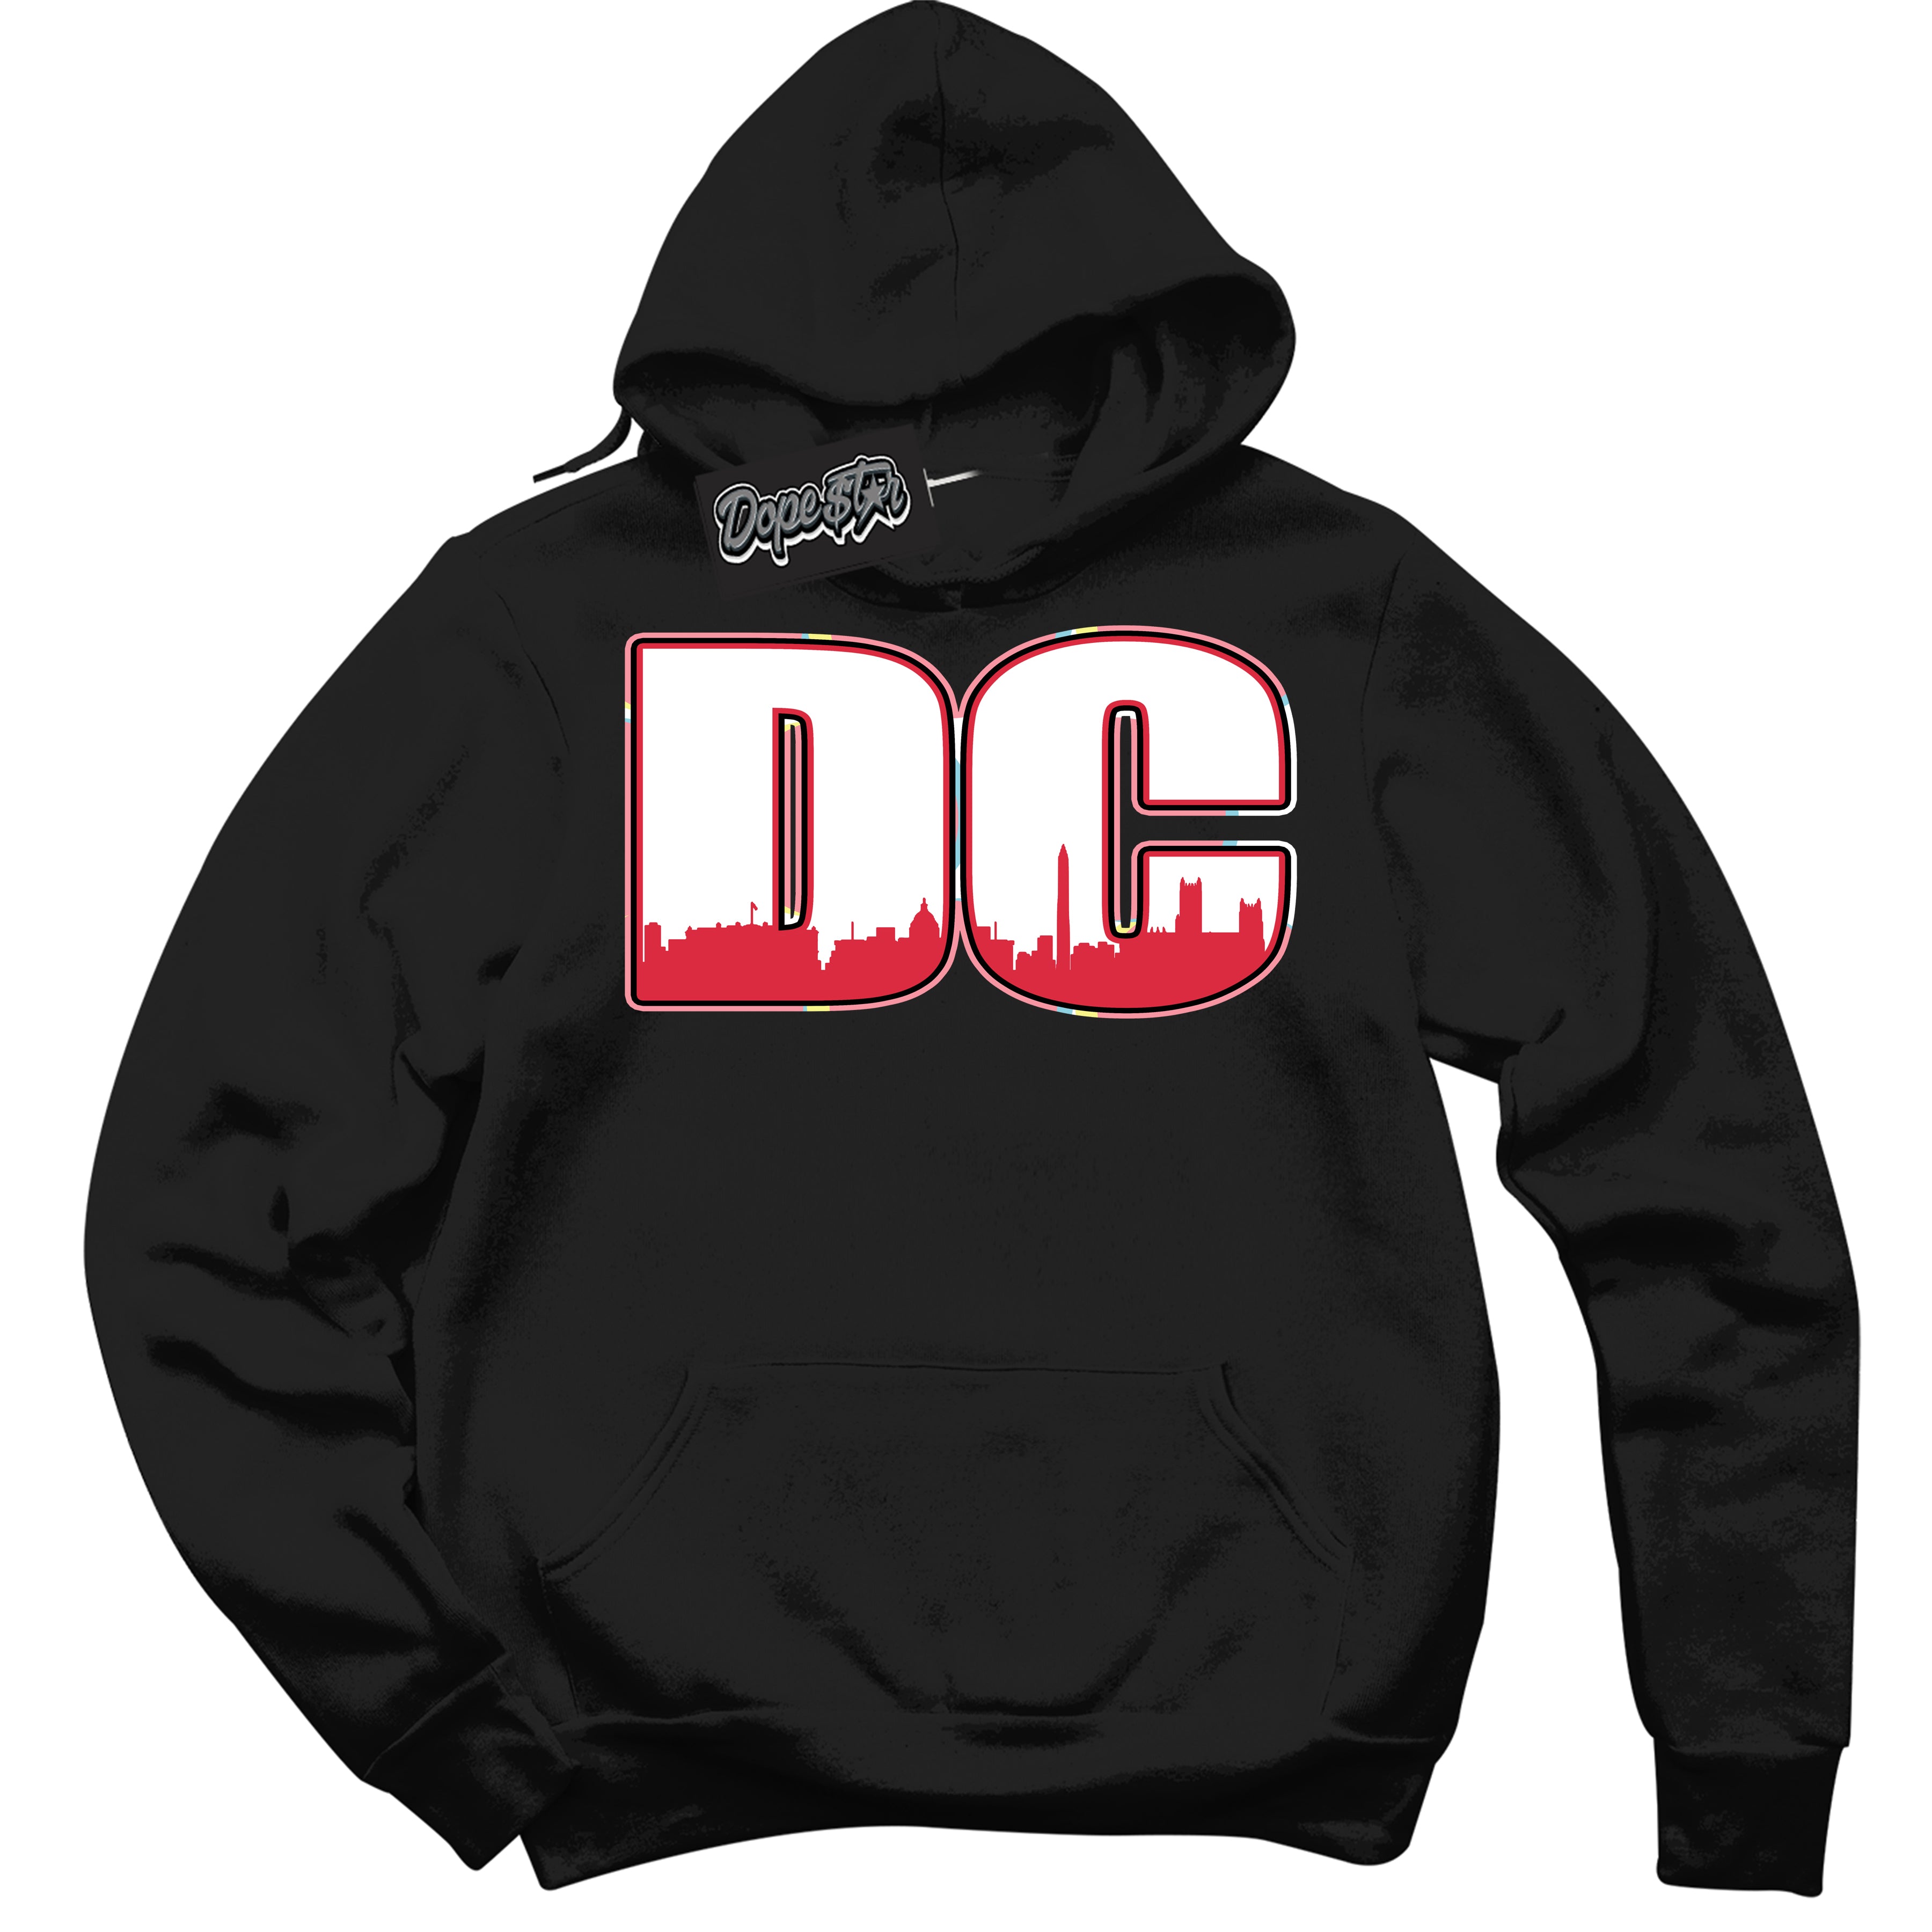 Cool Black Graphic DopeStar Hoodie with “ DC “ print, that perfectly matches Spider-Verse 1s sneakers